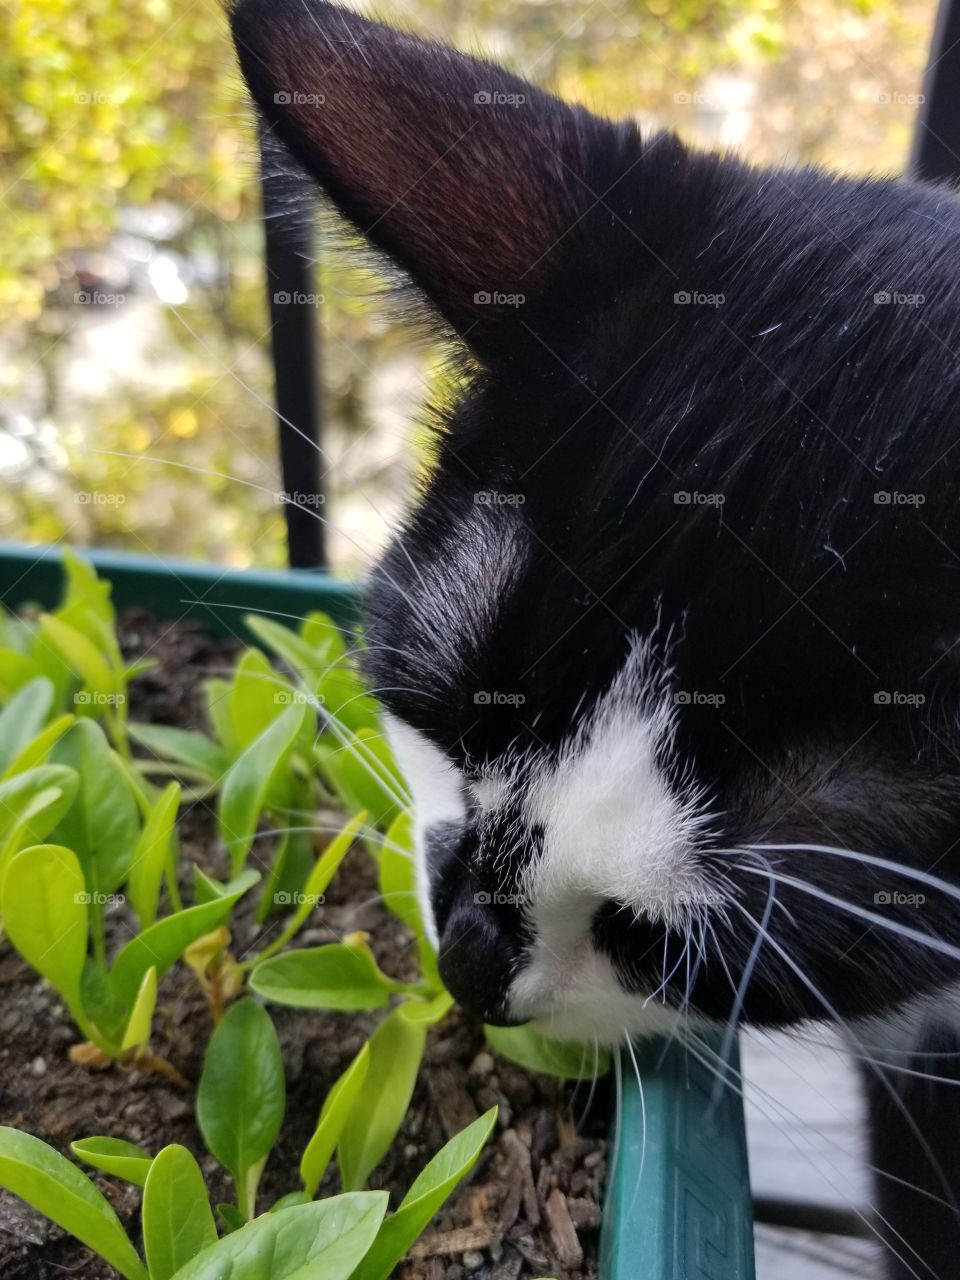 Our beautiful kitty munching fresh, home grown spinach! A close up picture to show off all her adorable fuzzy features!